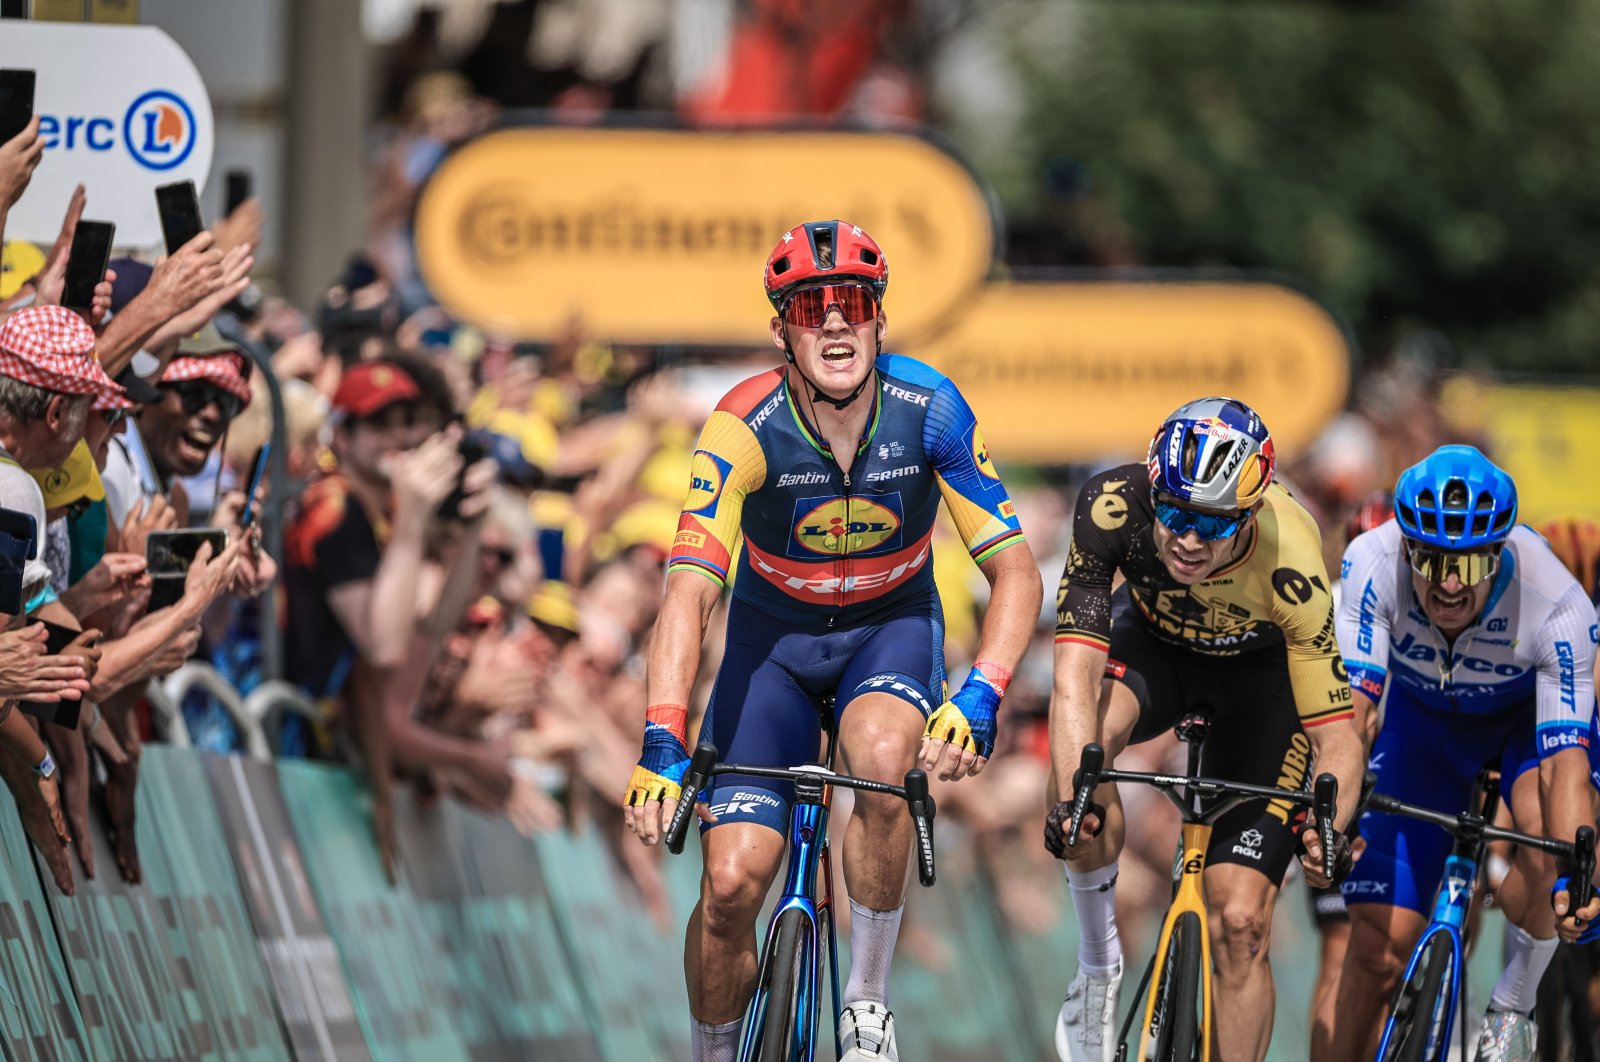 Danish rider Mads Pedersen of team Lidl-Trek (C) crosses the finish line to win the 8th stage of the Tour de France 2023, a 201km race from Libourne to Limoges, France, July 8, 2023. (EPA Photo)